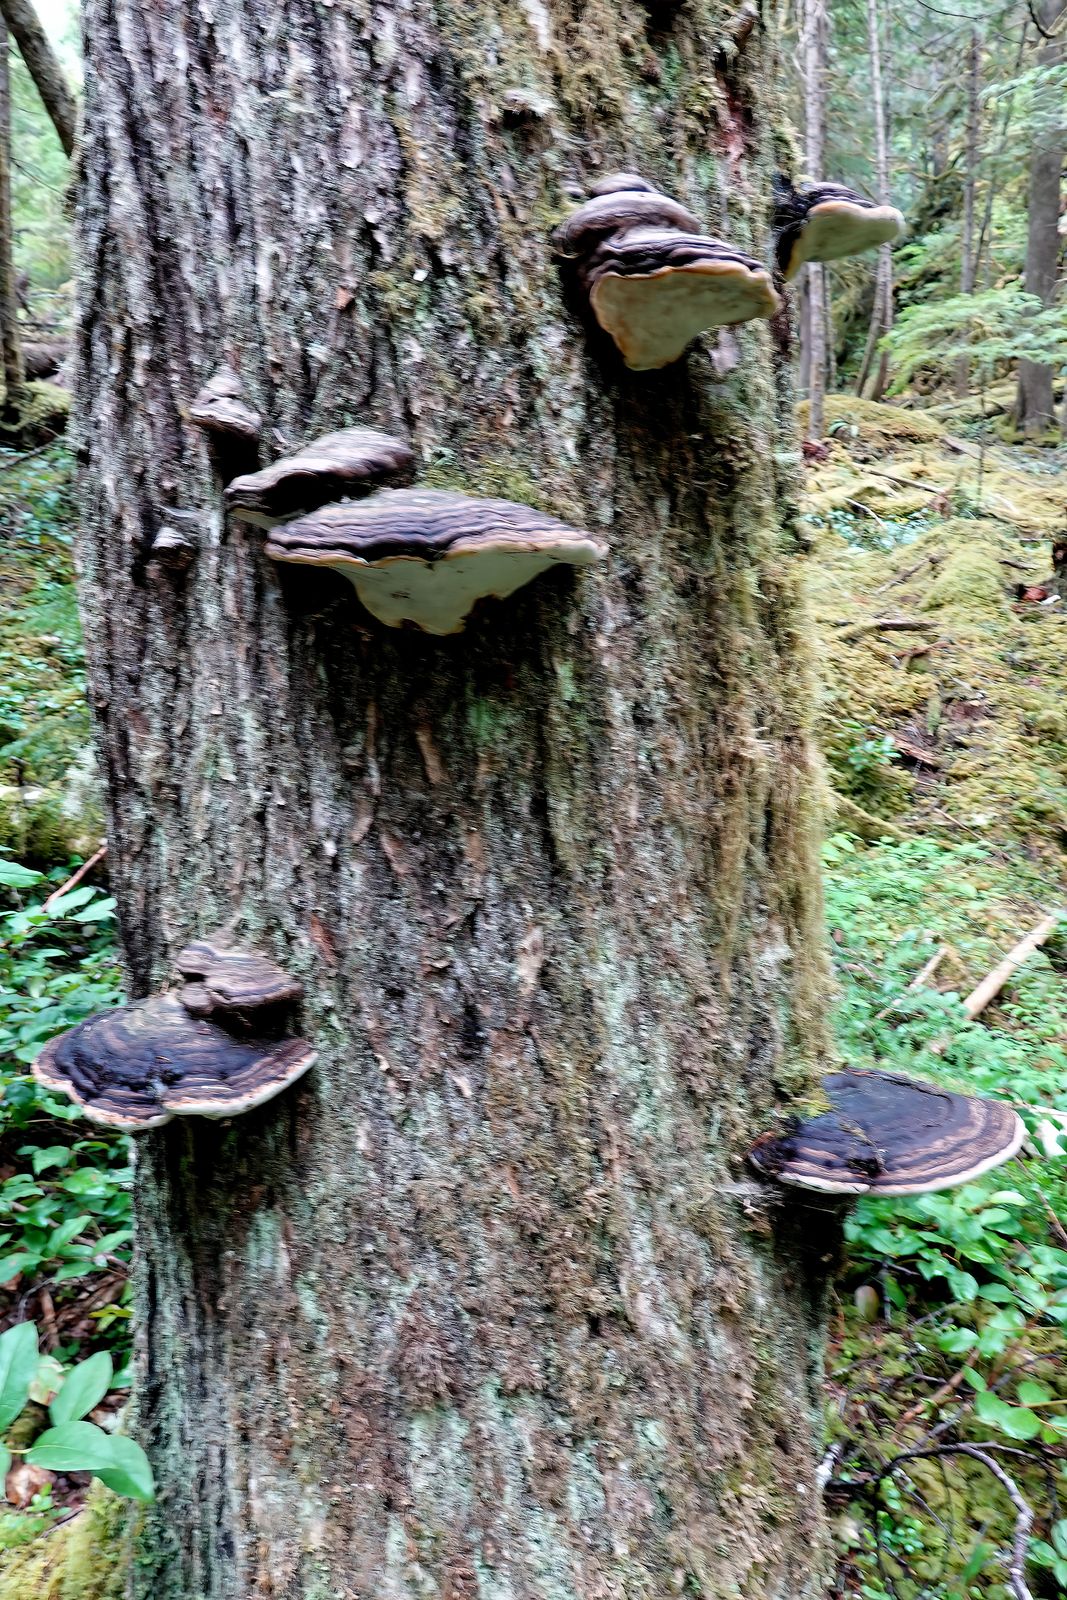  The bracket fungus sometimes grow in clumps  